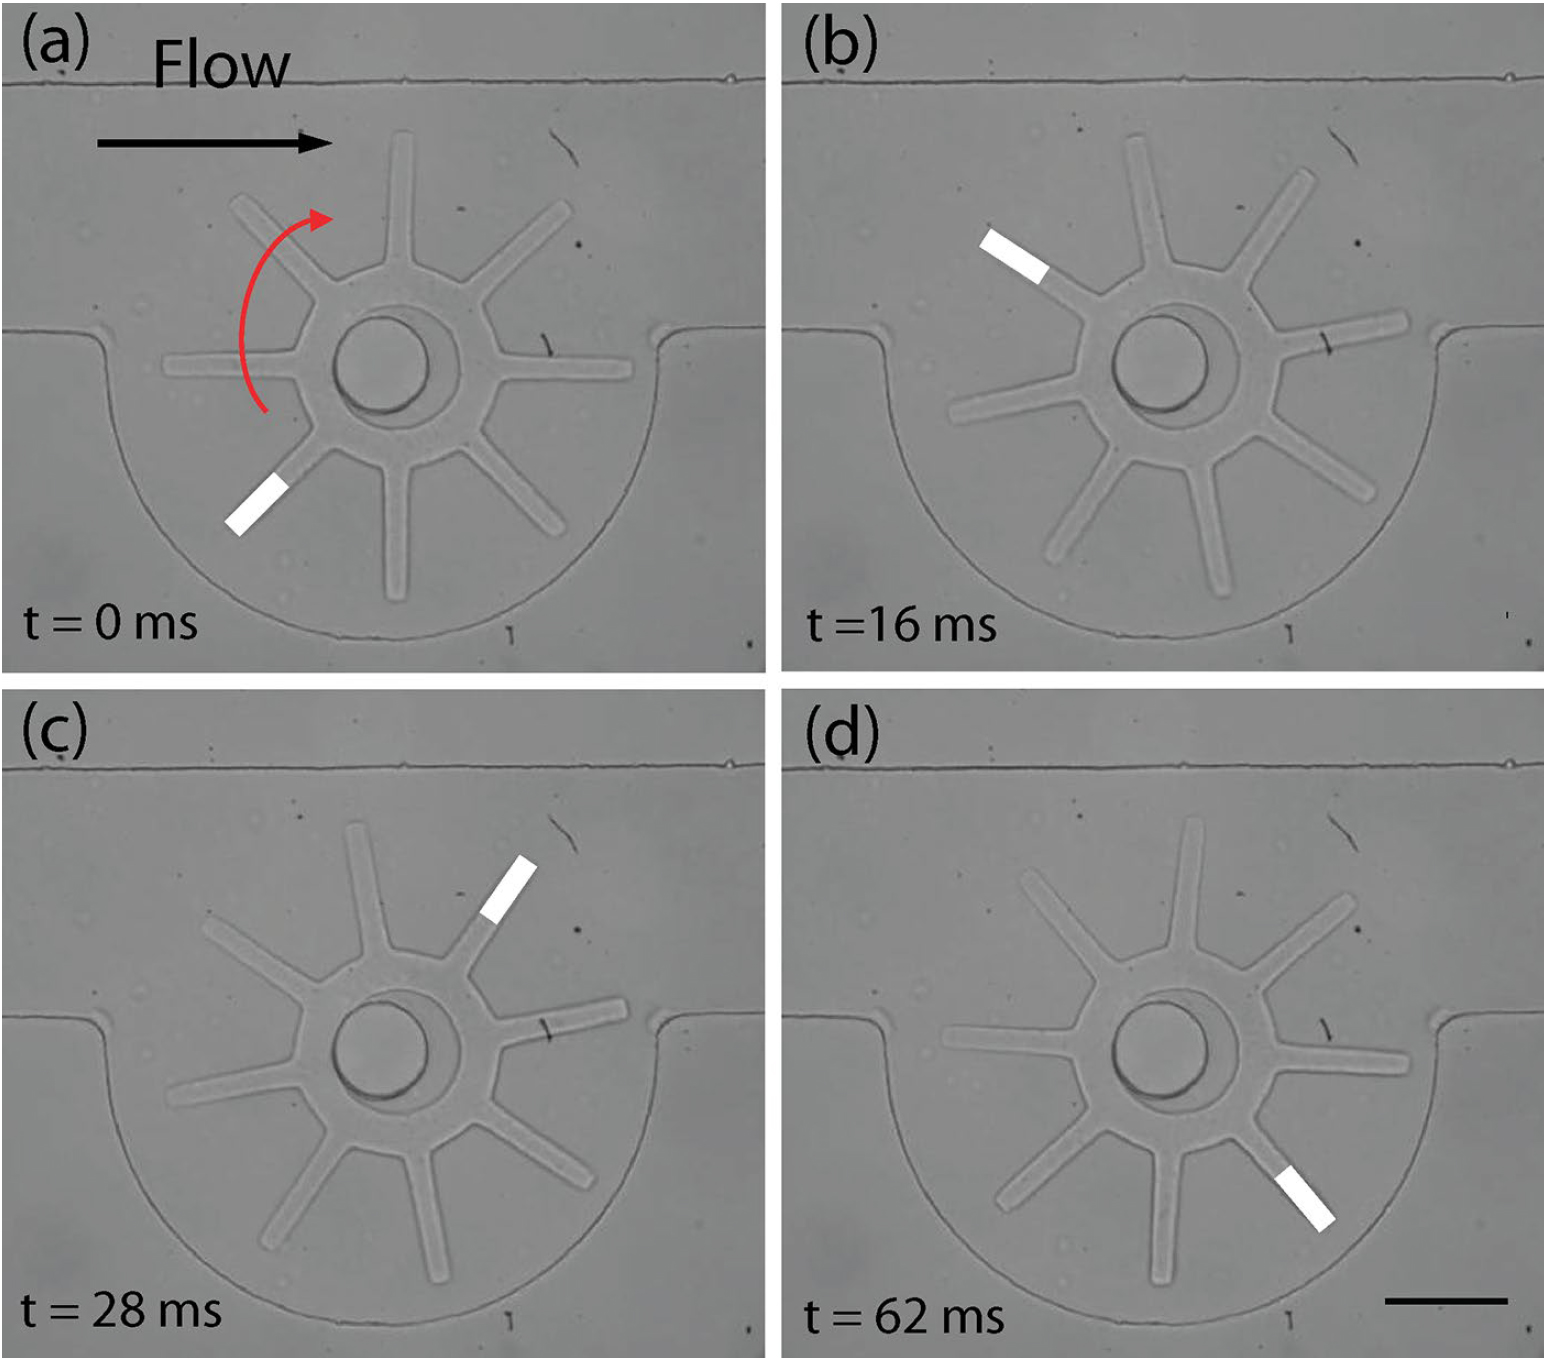 Experimental images of a gear made by stop flow lithography.